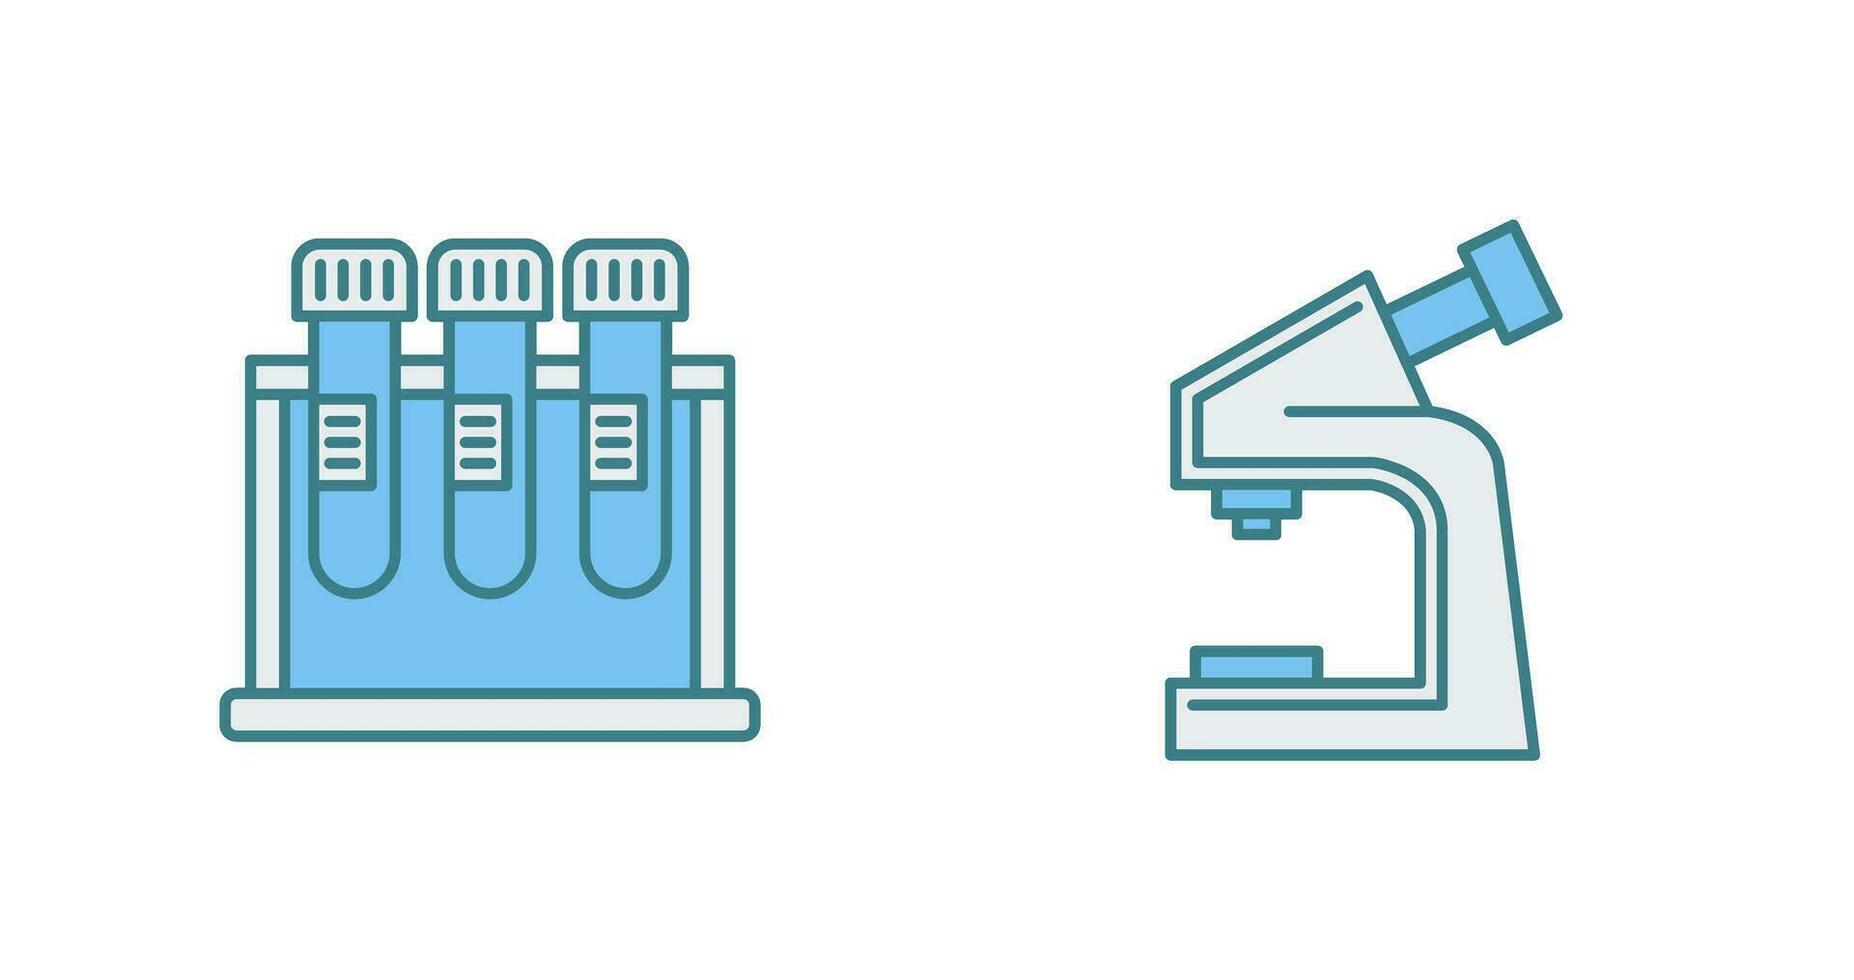 Test Tube and Microscope Icon vector